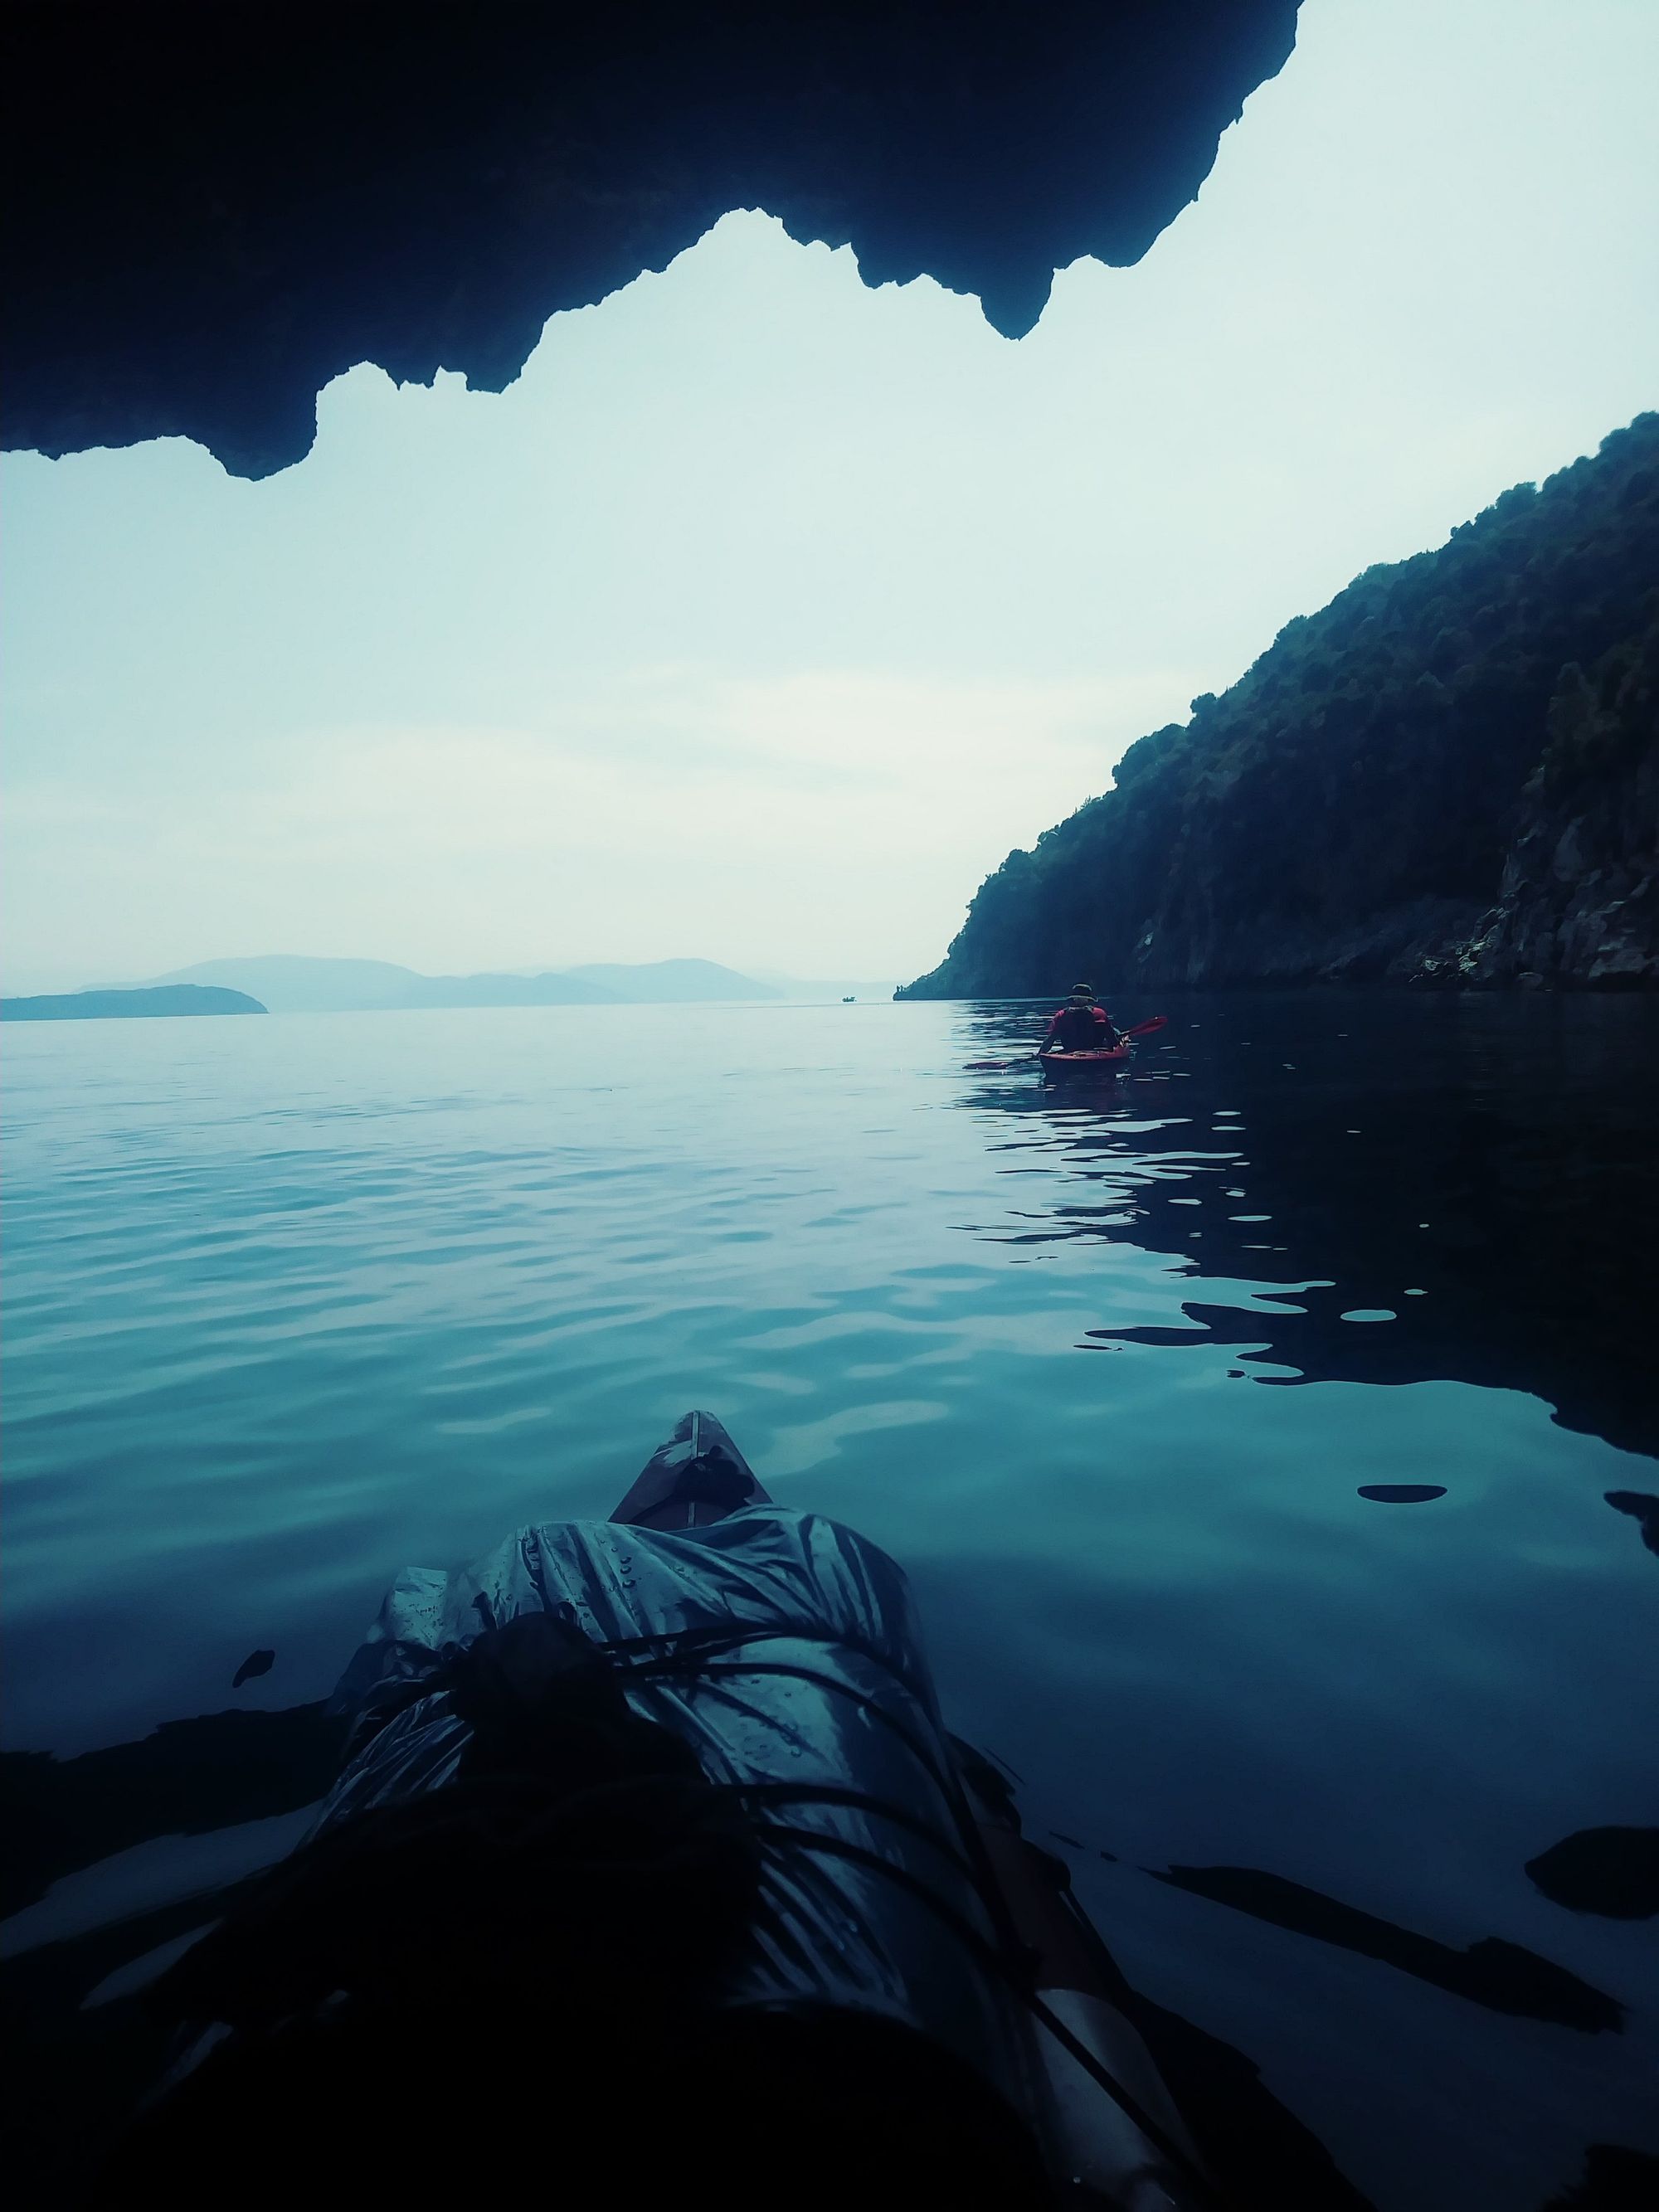 Kayaking in Lefkada during the blue hour.